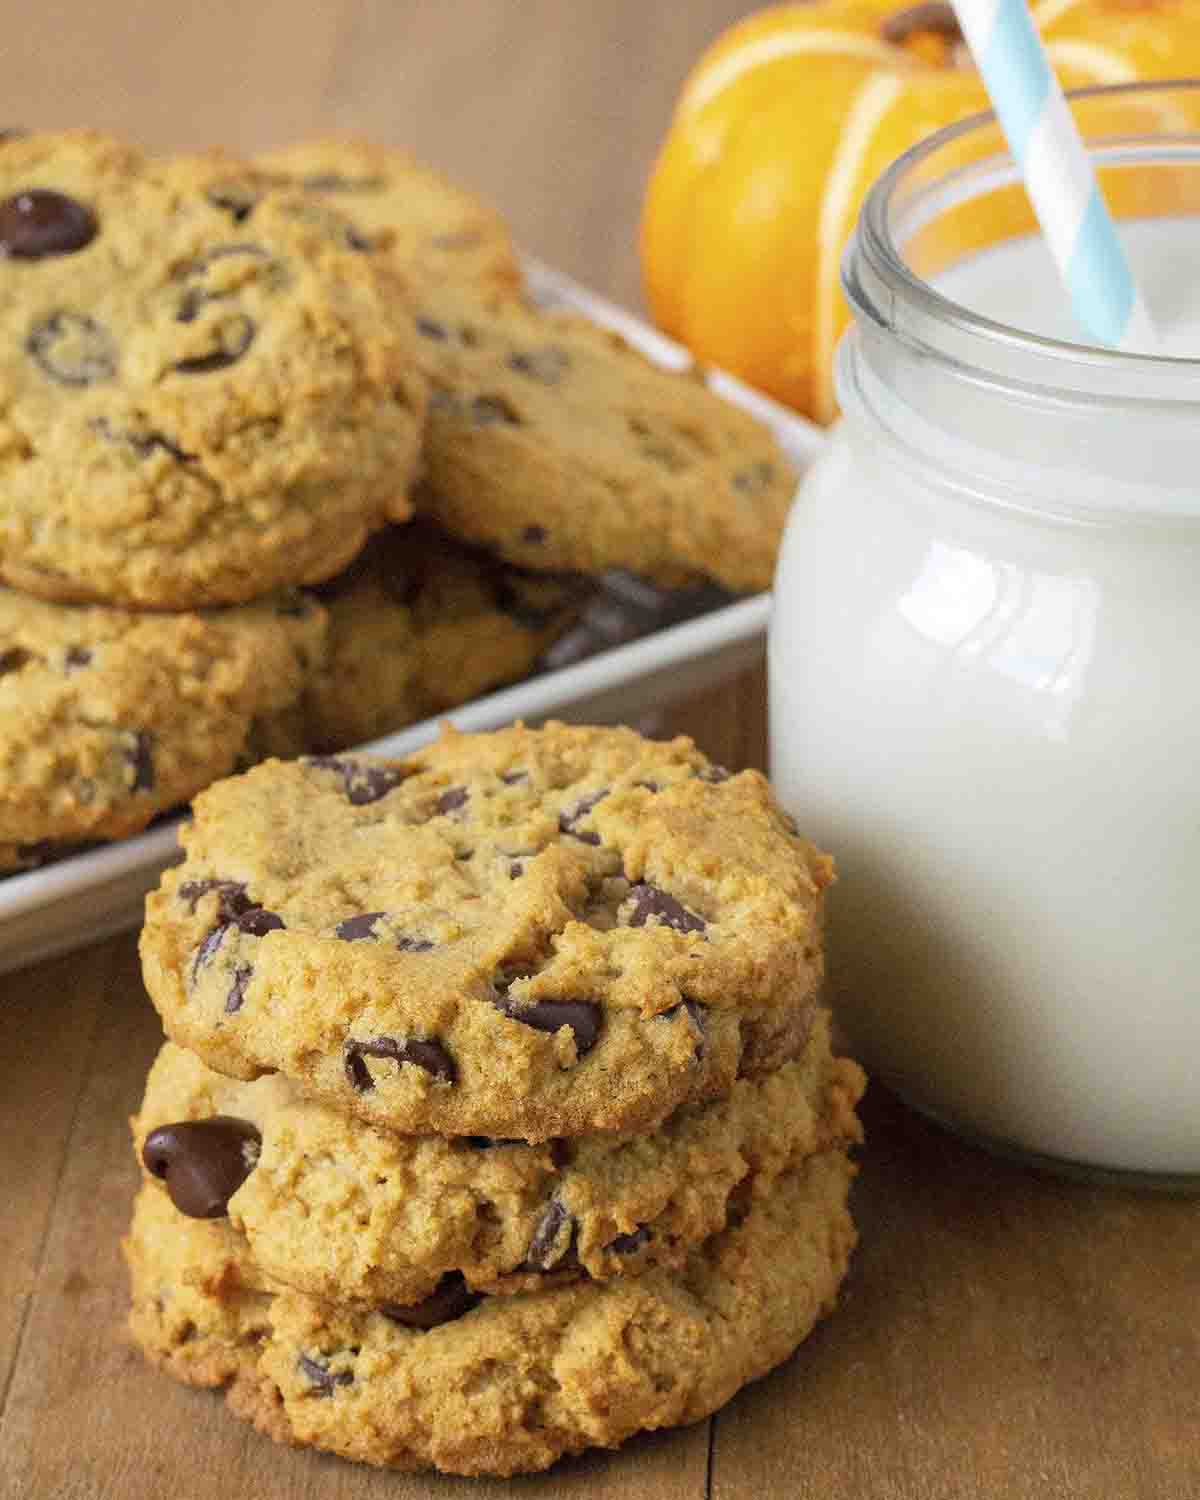 A must-make fall recipe to add to your list is this one, for easy gluten free pumpkin chocolate chip cookies! Not only are they the best, they’re also vegan AND gluten-free, making them dairy free, wheat-free and egg free! They’re soft on the inside with a bit of crispiness on the outside, plus, they’re packed with warm pumpkin spices and loaded with chocolate chips. Add these gf pumpkin cookies to your list of tasty vegan pumpkin recipes to make for family and friends this year.